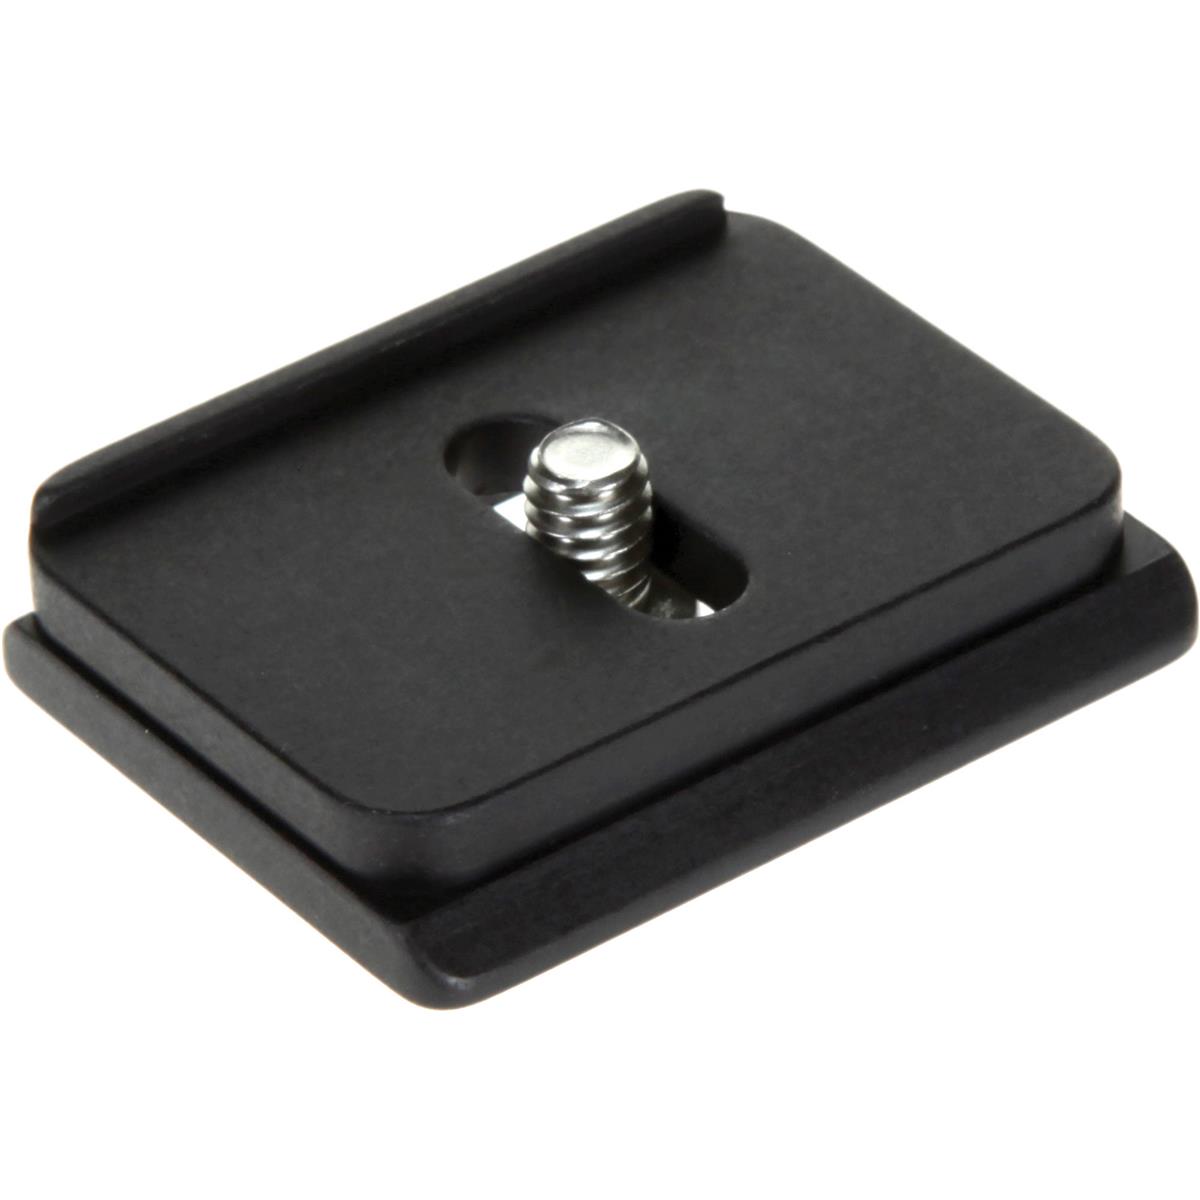 Image of Acratech 2173 Quick Release Plate for Panasonic G1/GH1